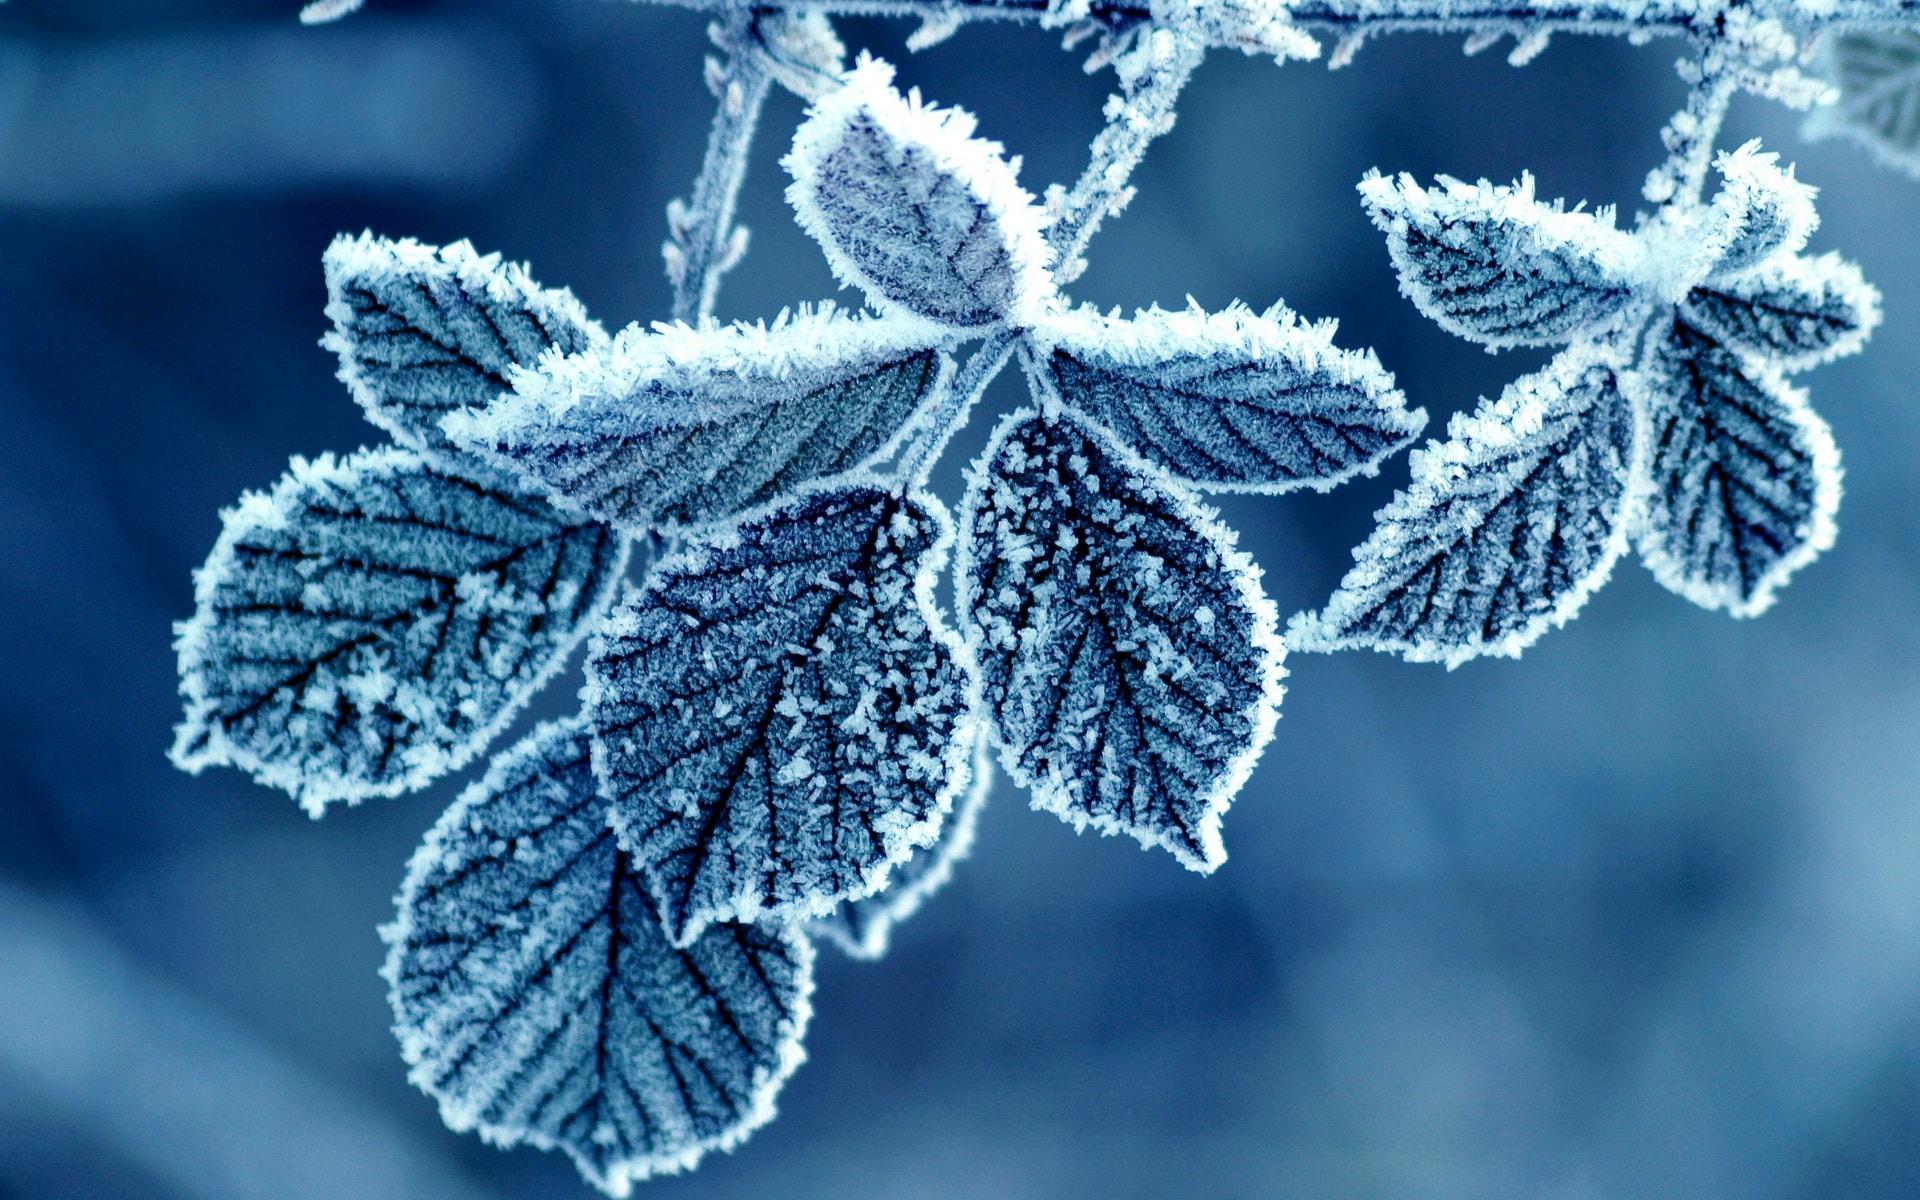 blue frozen leafs winter Wallpaper and Free Stock